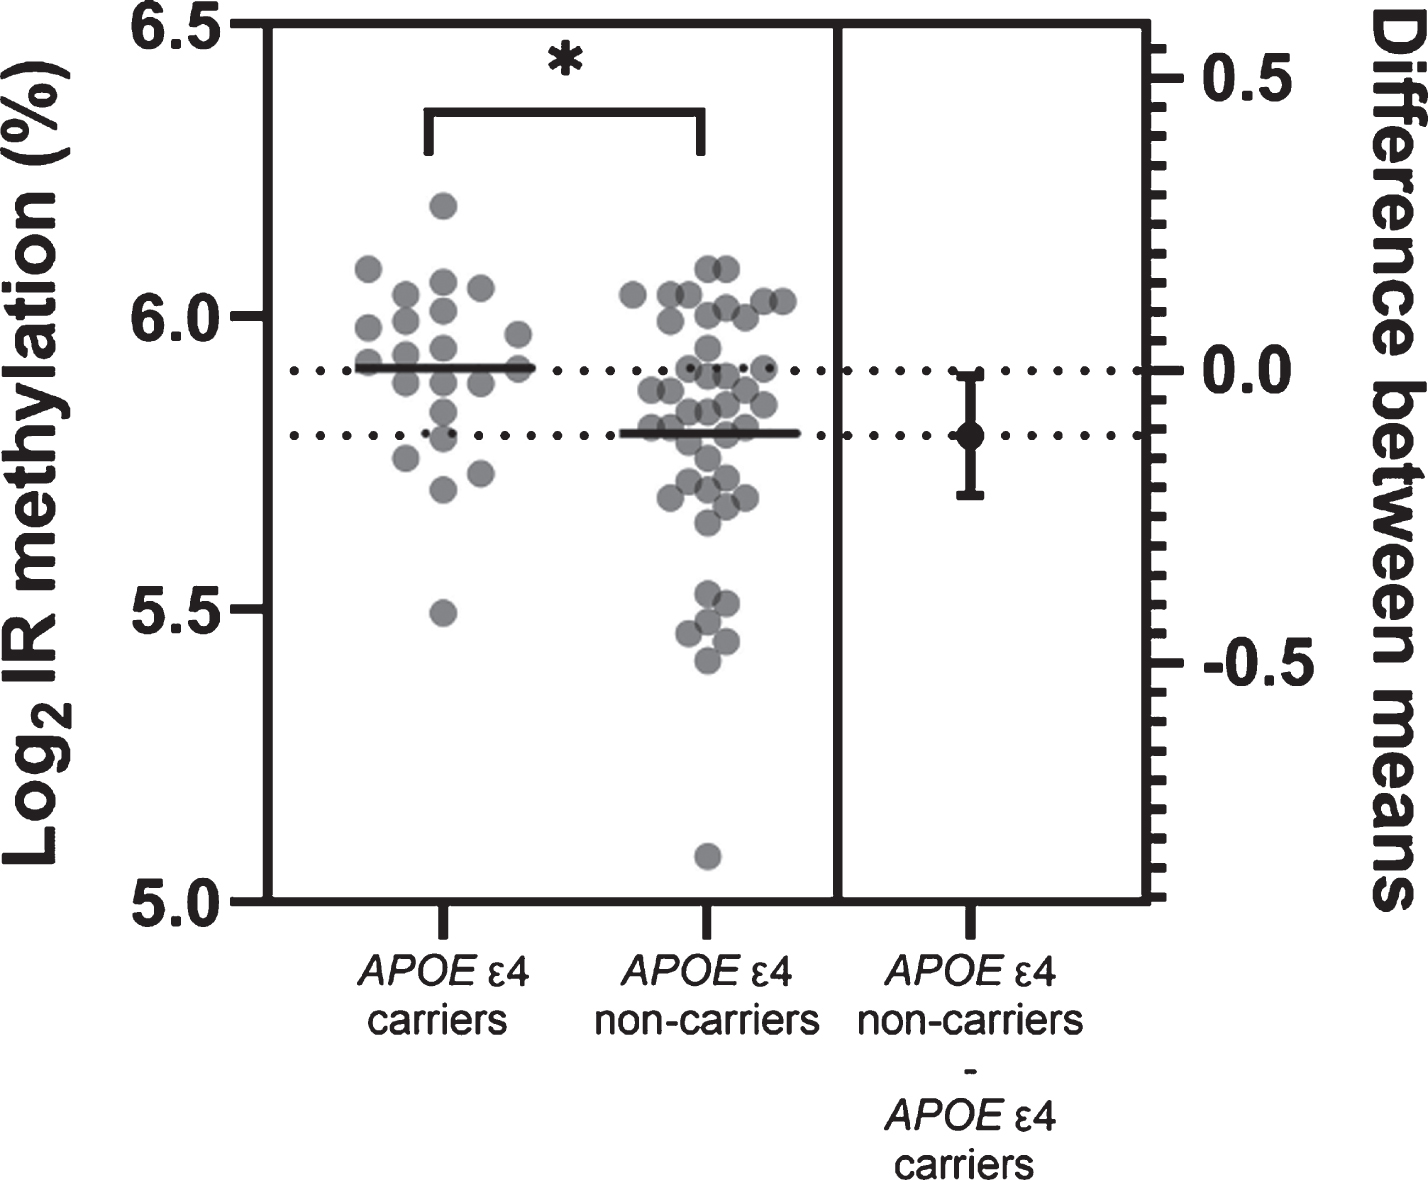 Estimation plot for APOE promoter region methylation differences between APOE ɛ4 carriers and non-carriers. Horizontal lines represent mean group values. Difference between group means with 95%confidence intervals is also plotted. n = 66. *p < 0.05.